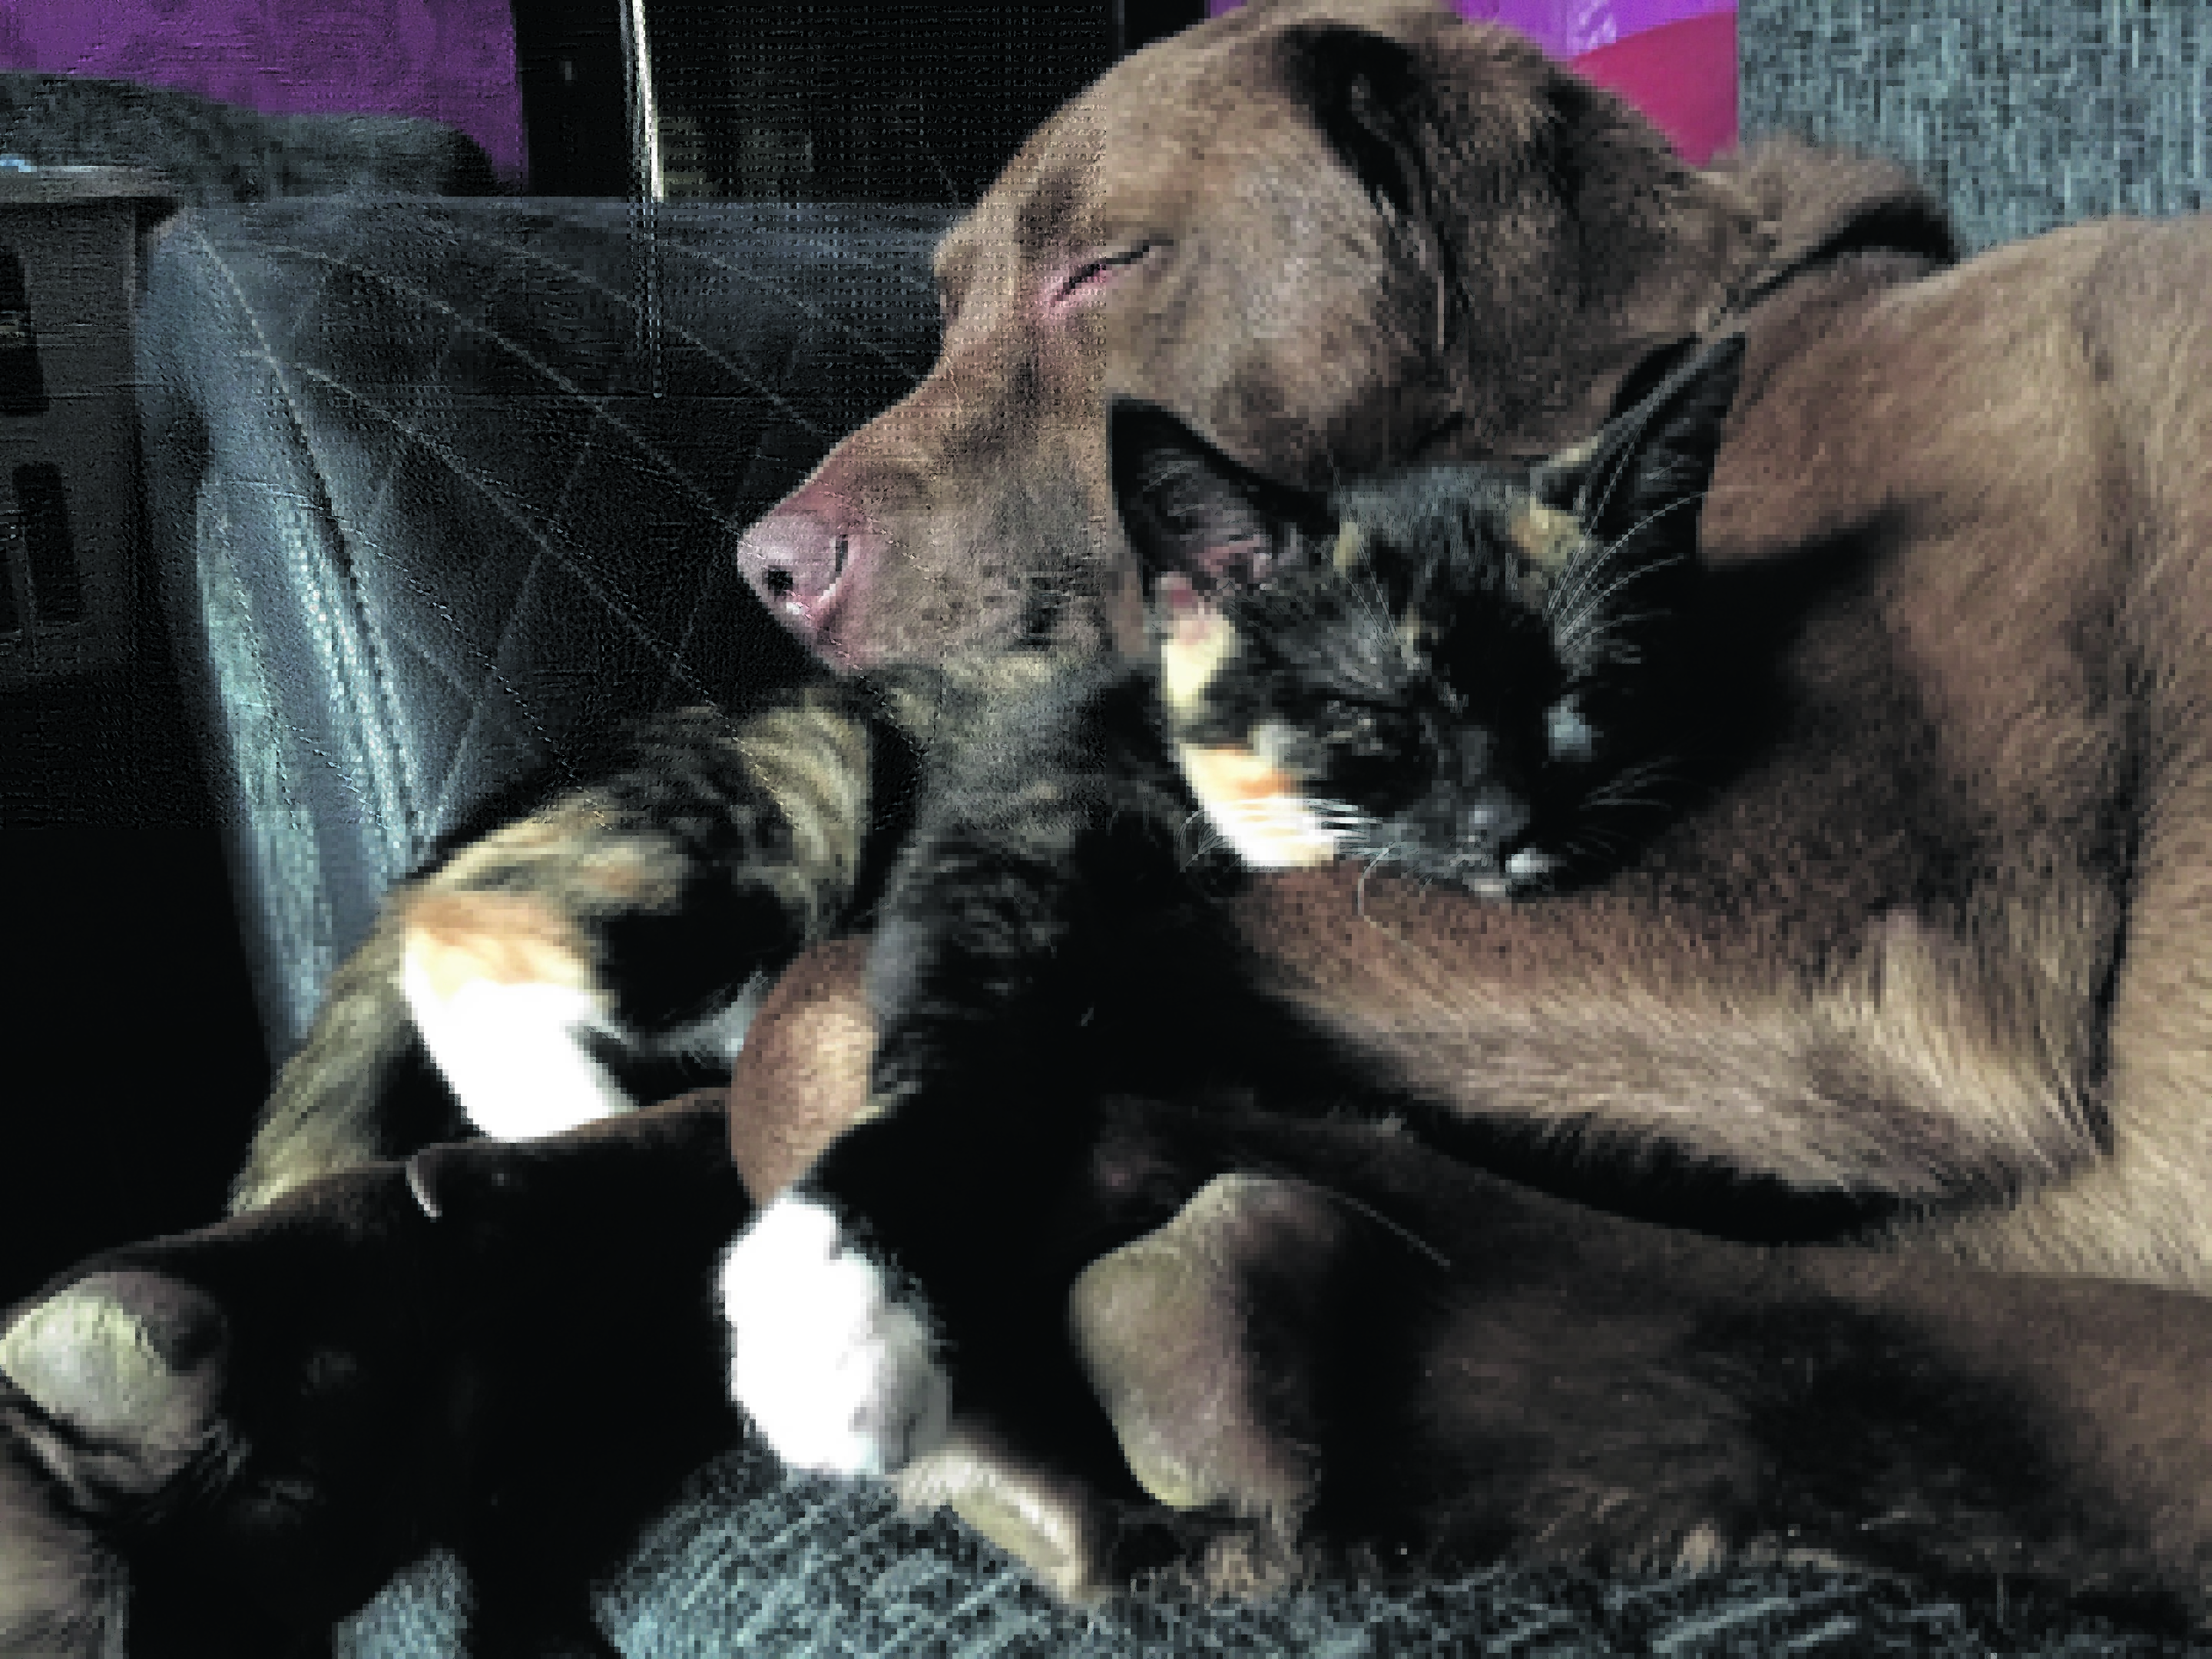 Binky the kitten and Haggis the chocolate Lab live with Thomas and Kenna Stewart on the isle of  Lewis. They are our winners this week.